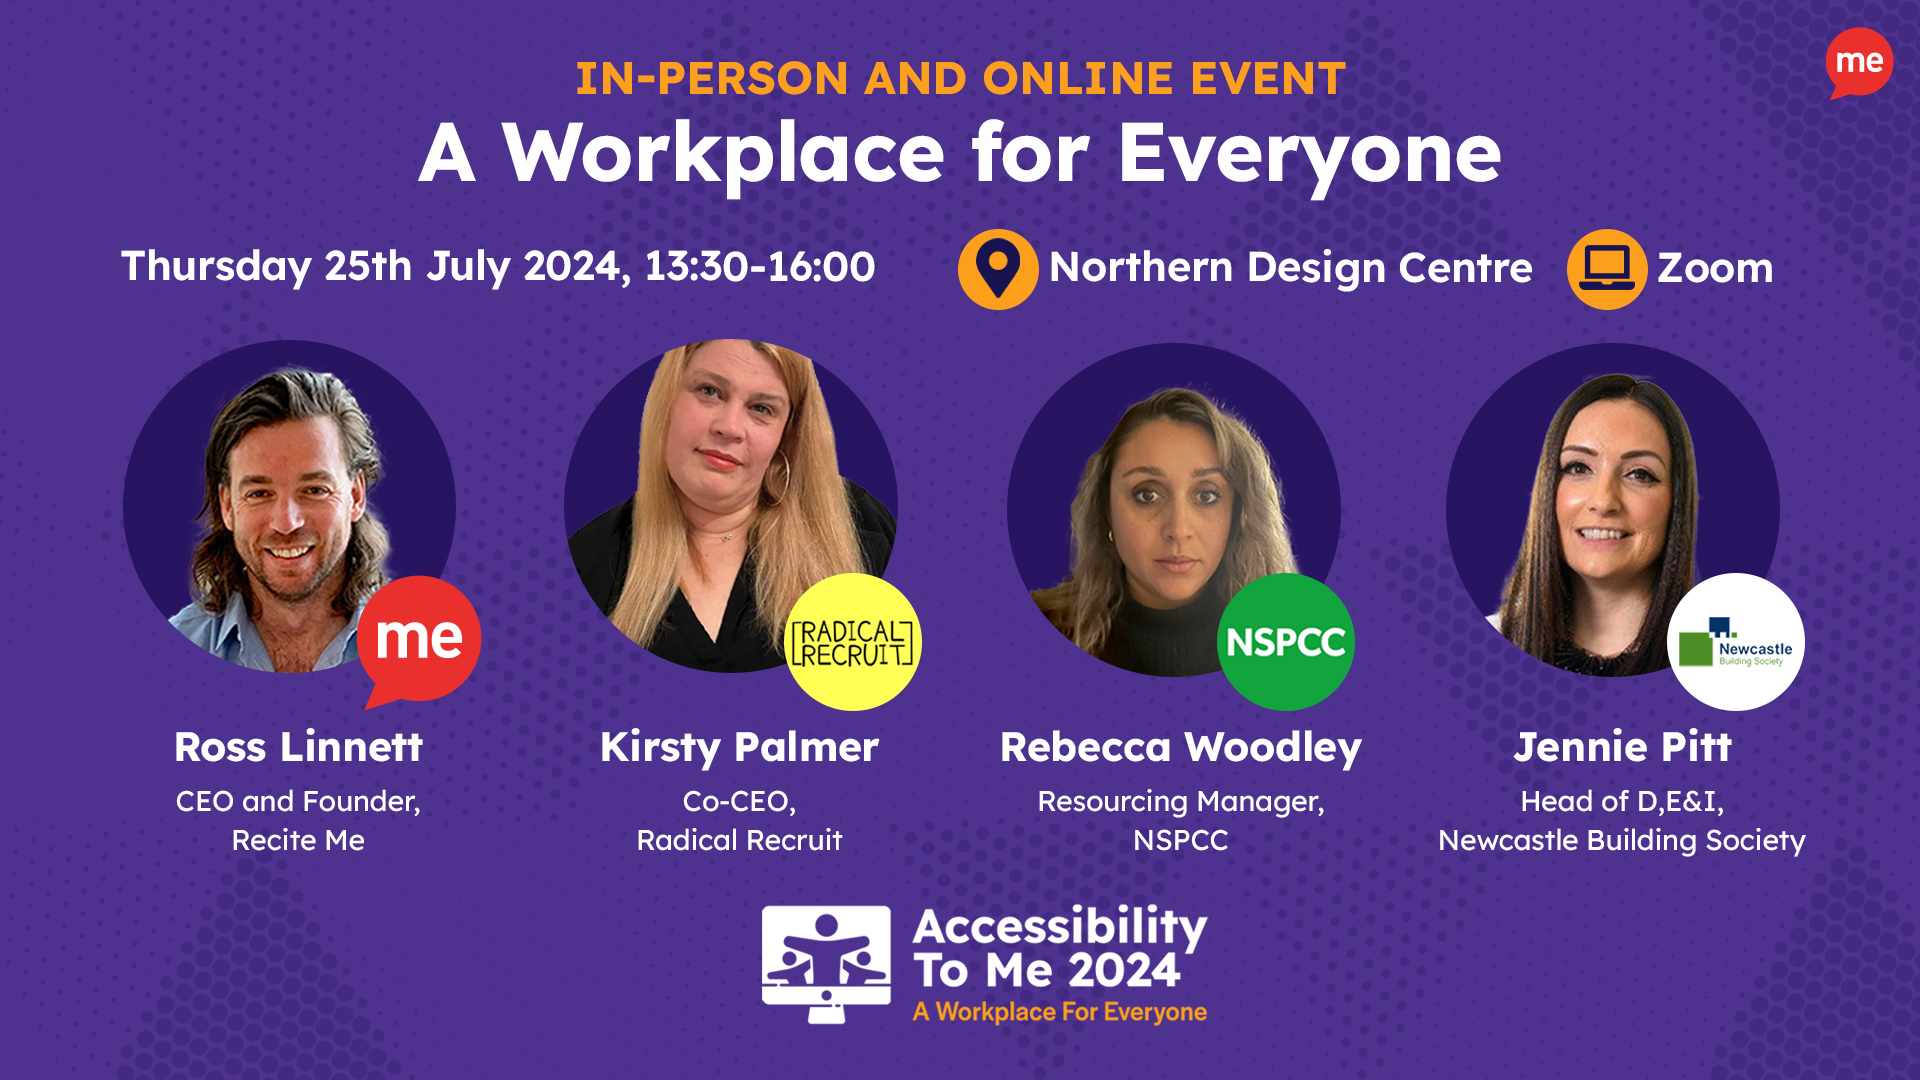 In-person and Online Event: A Workplace for Everyone with photos of the panellists